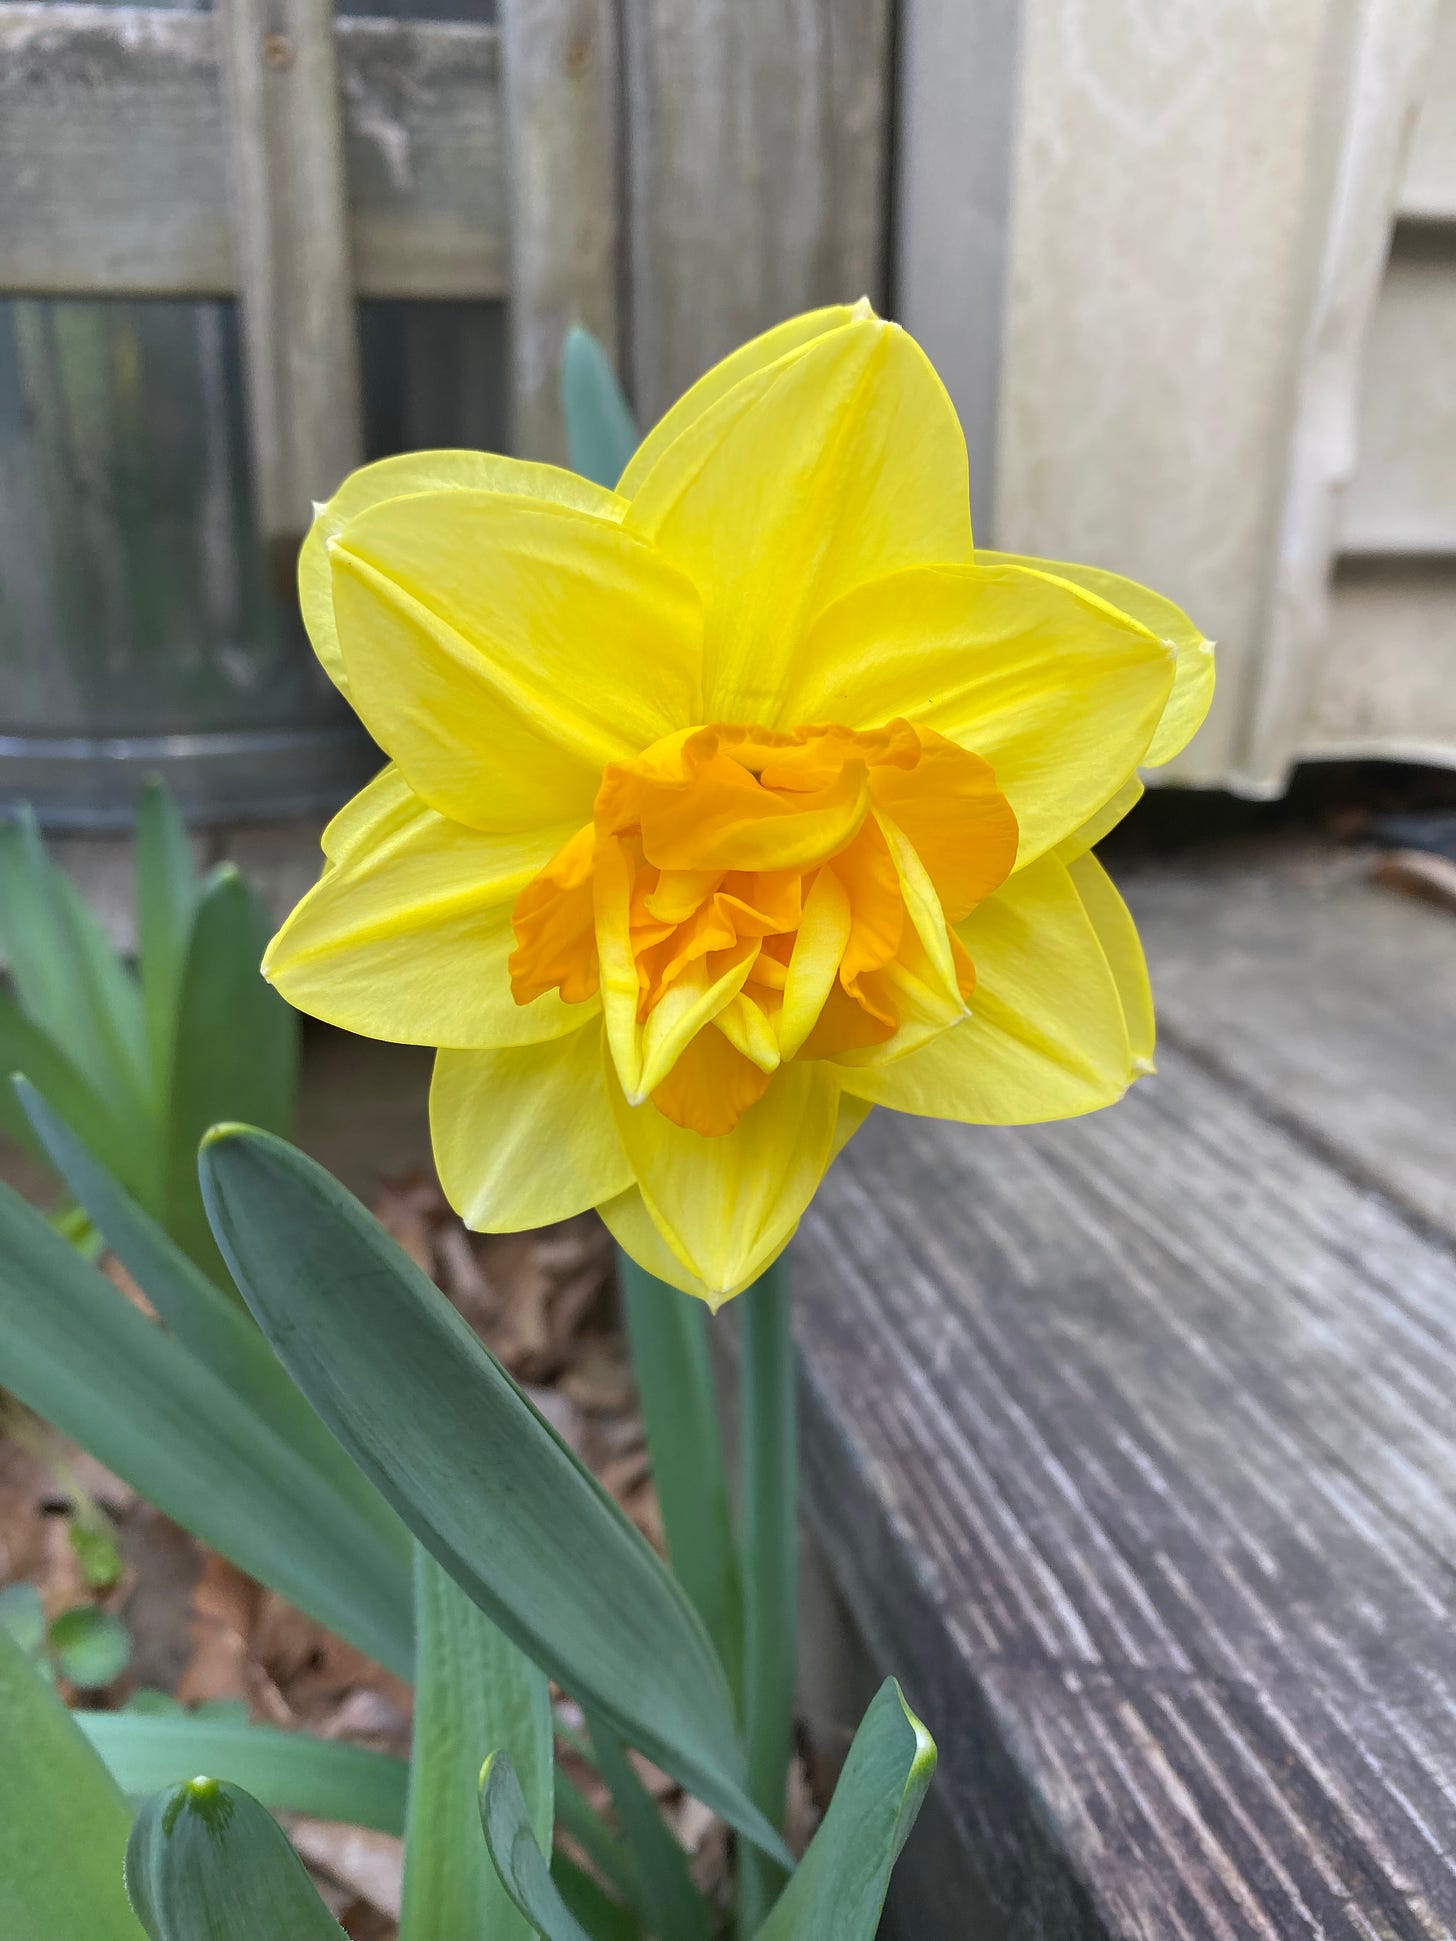 Closeup of a bright yellow daffodil with an orange center.